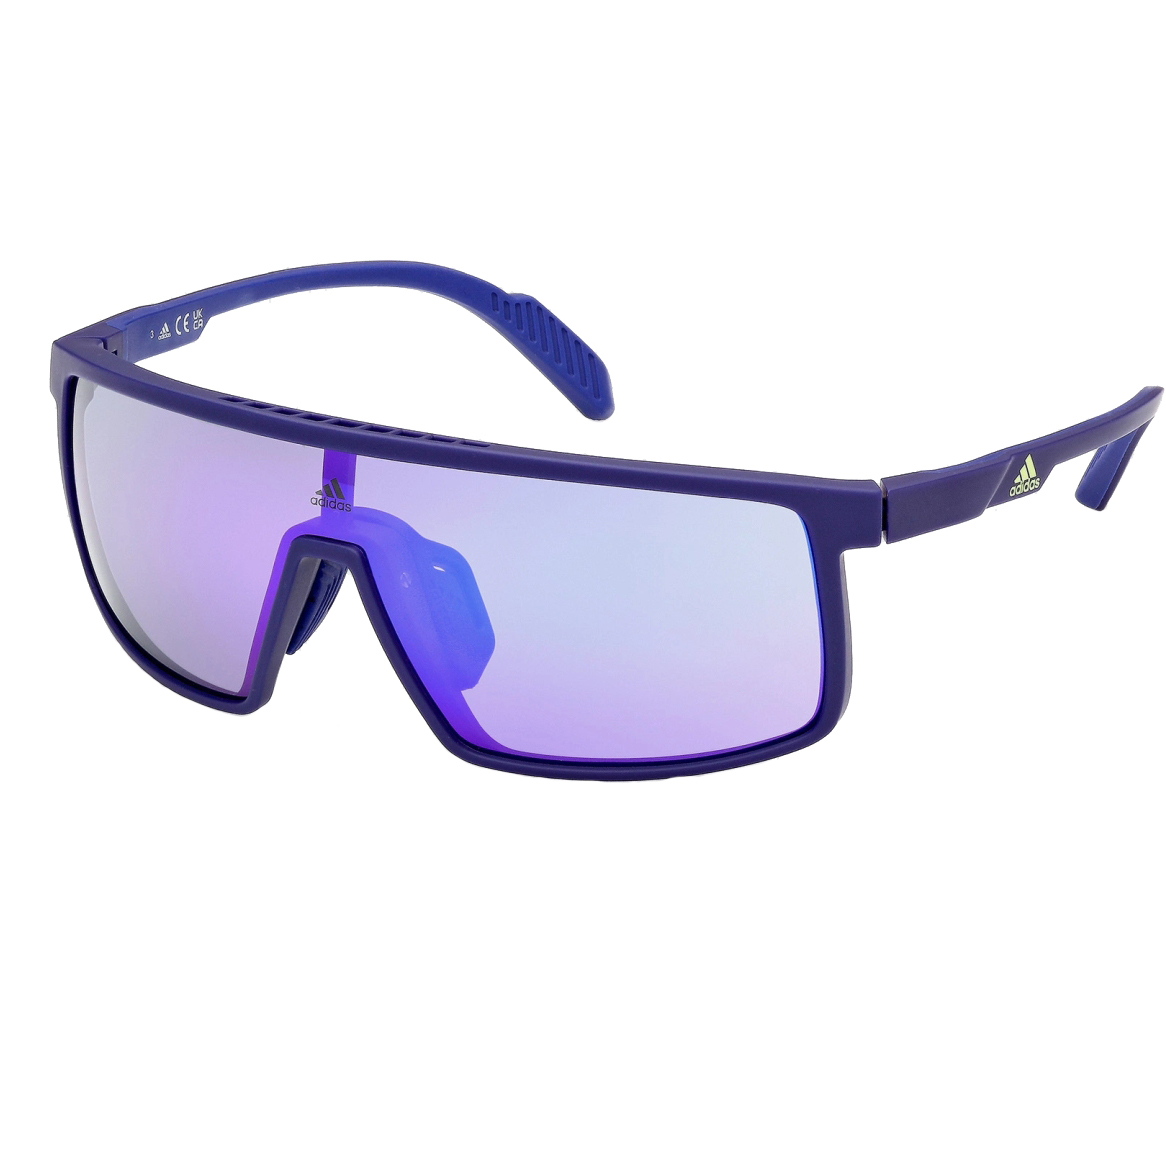 Picture of adidas Prfm Shield SP0057 Sport Sunglasses - Blue/Other / Contrast Mirror Violet